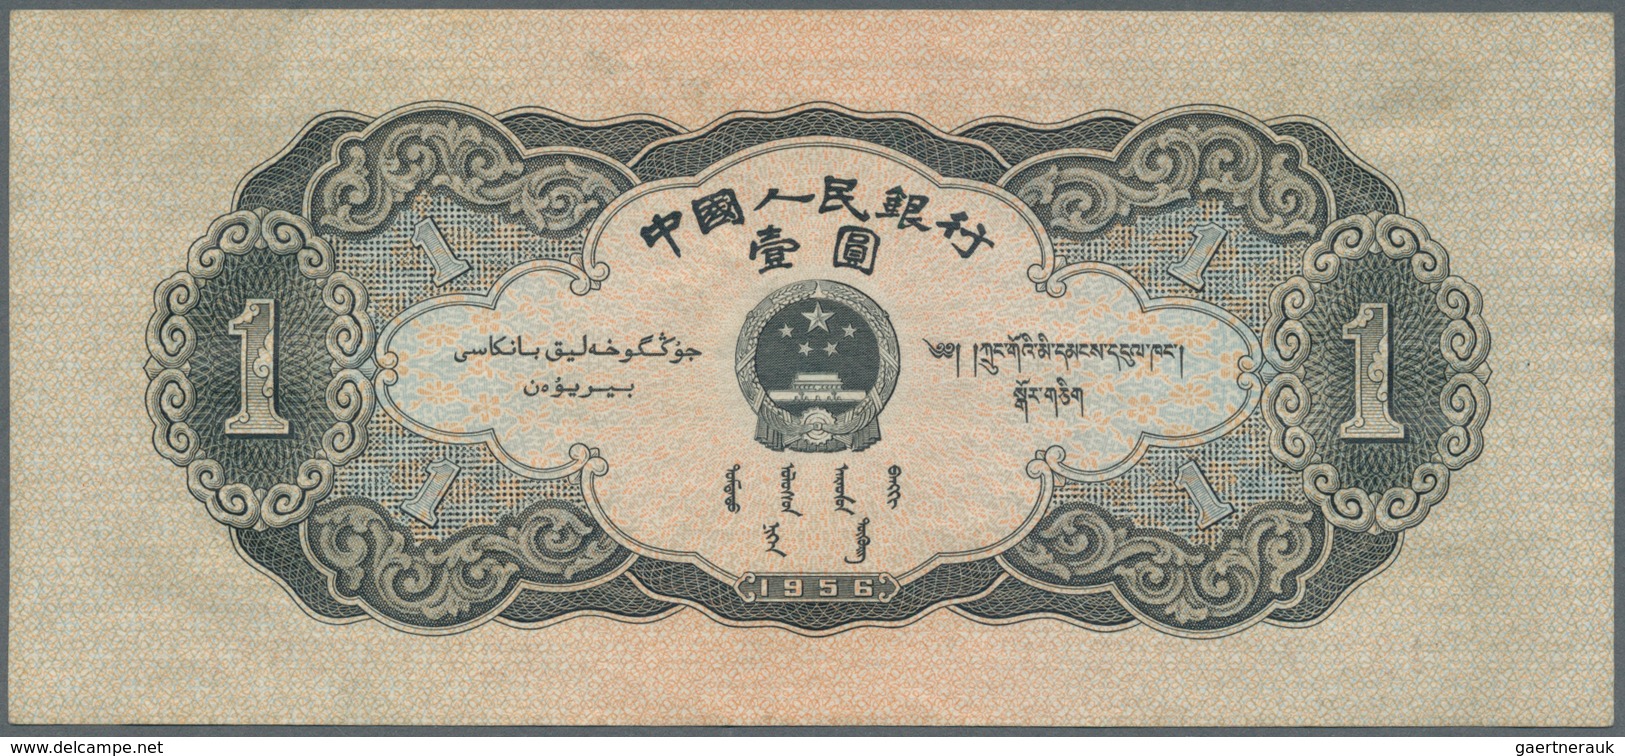 01301 China: 1 Yuan 1956 P. 871, Light Dints In Paper, Unfolded, Original Note With Intaglio Print, Condit - China